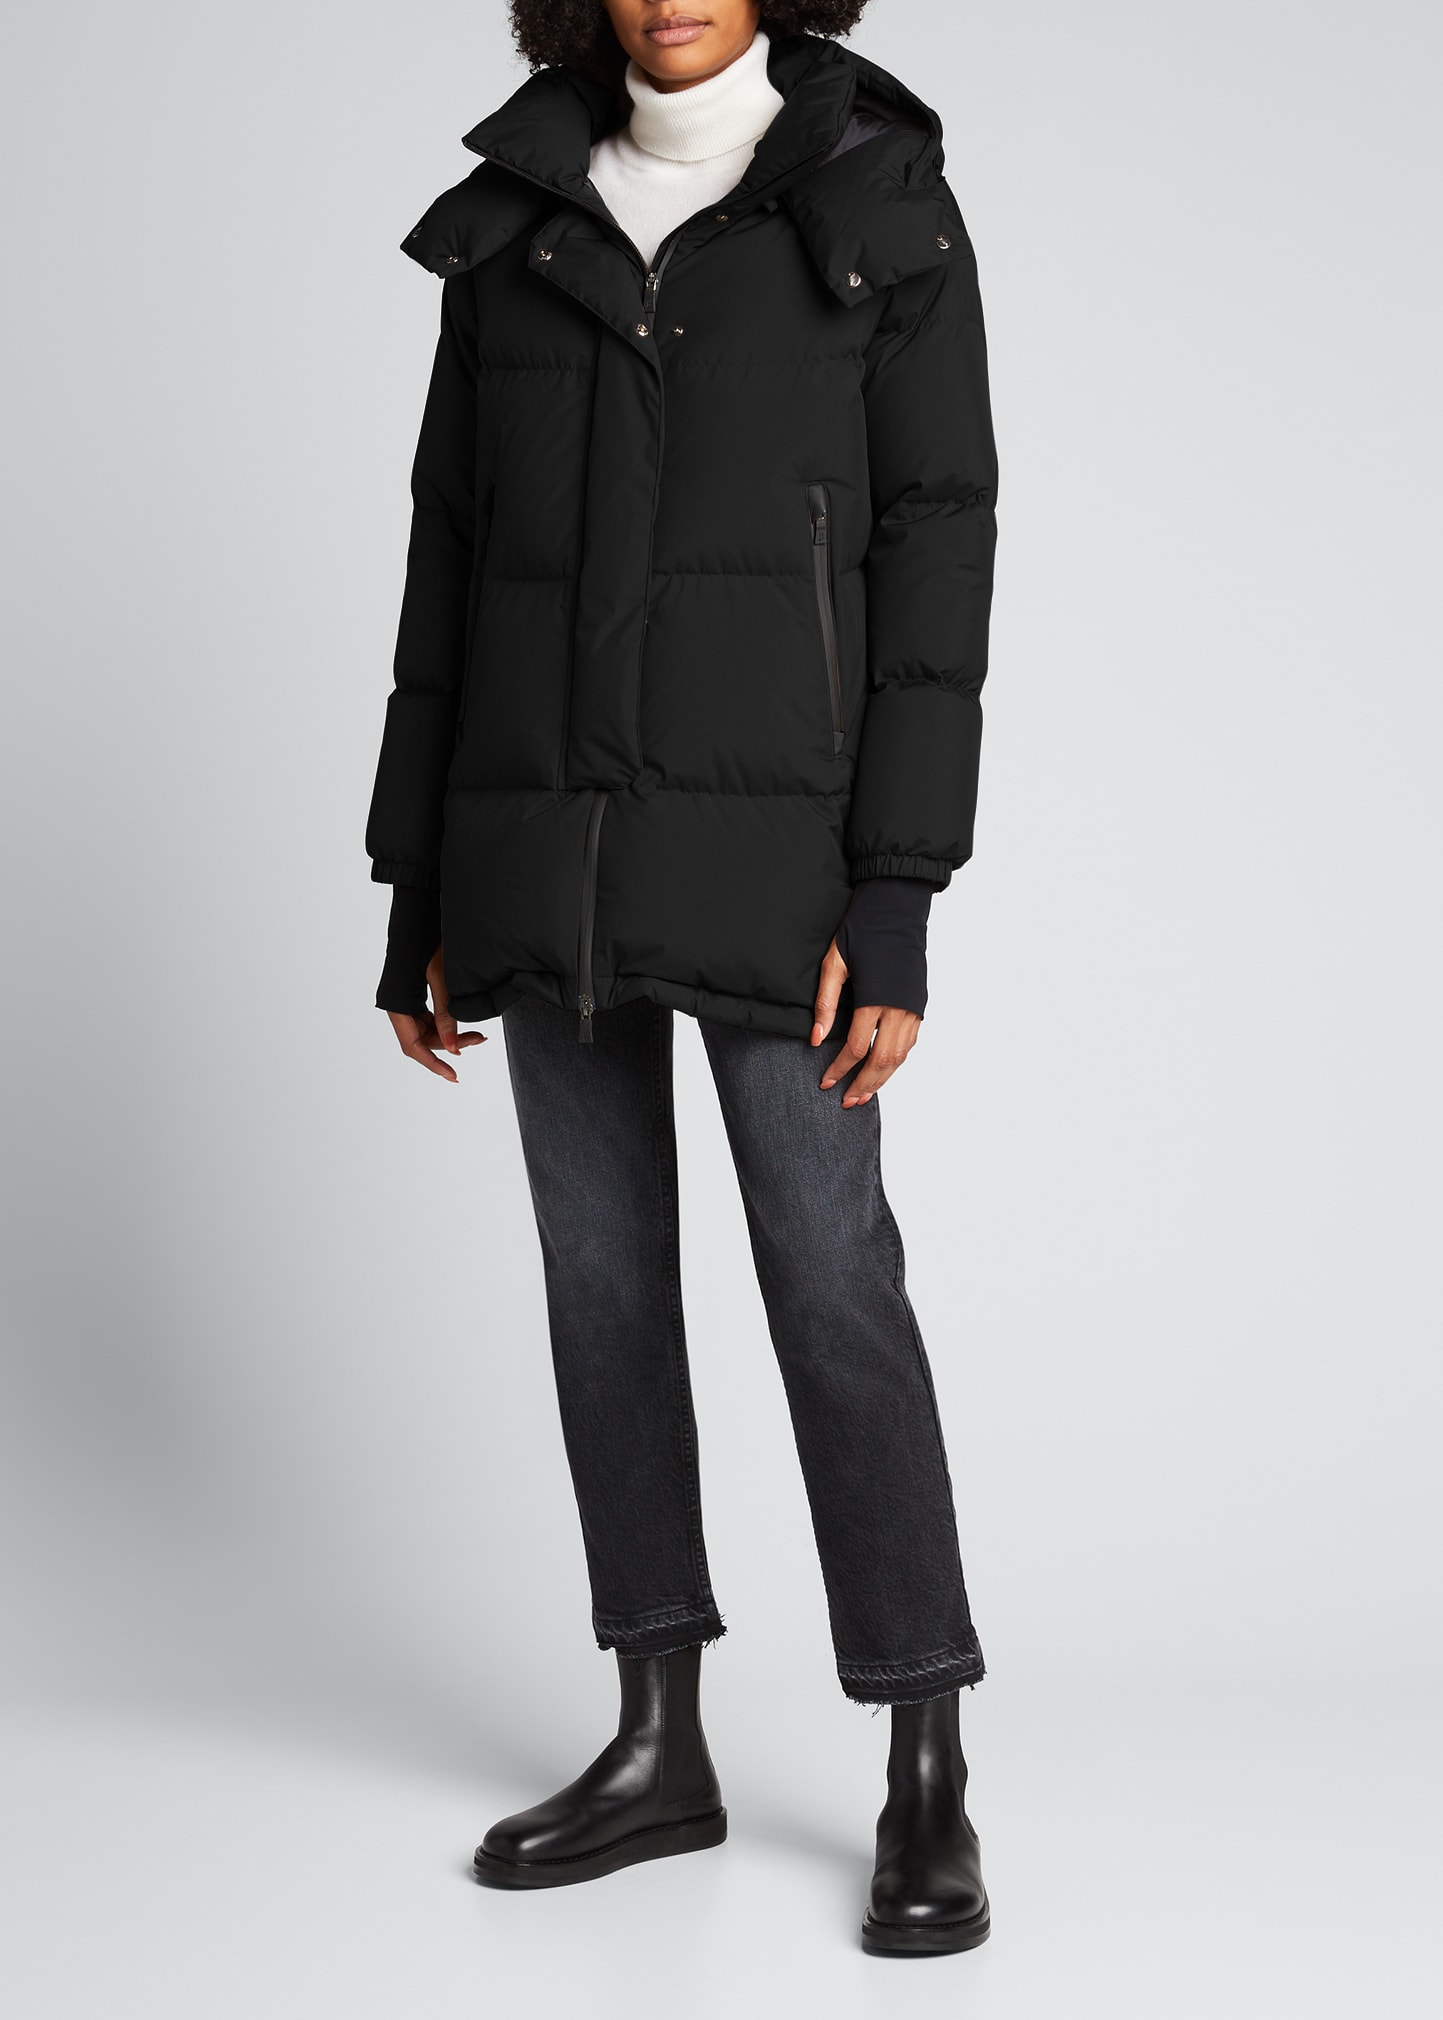 Herno Woven Puffer Coat With Hood In Black Damage